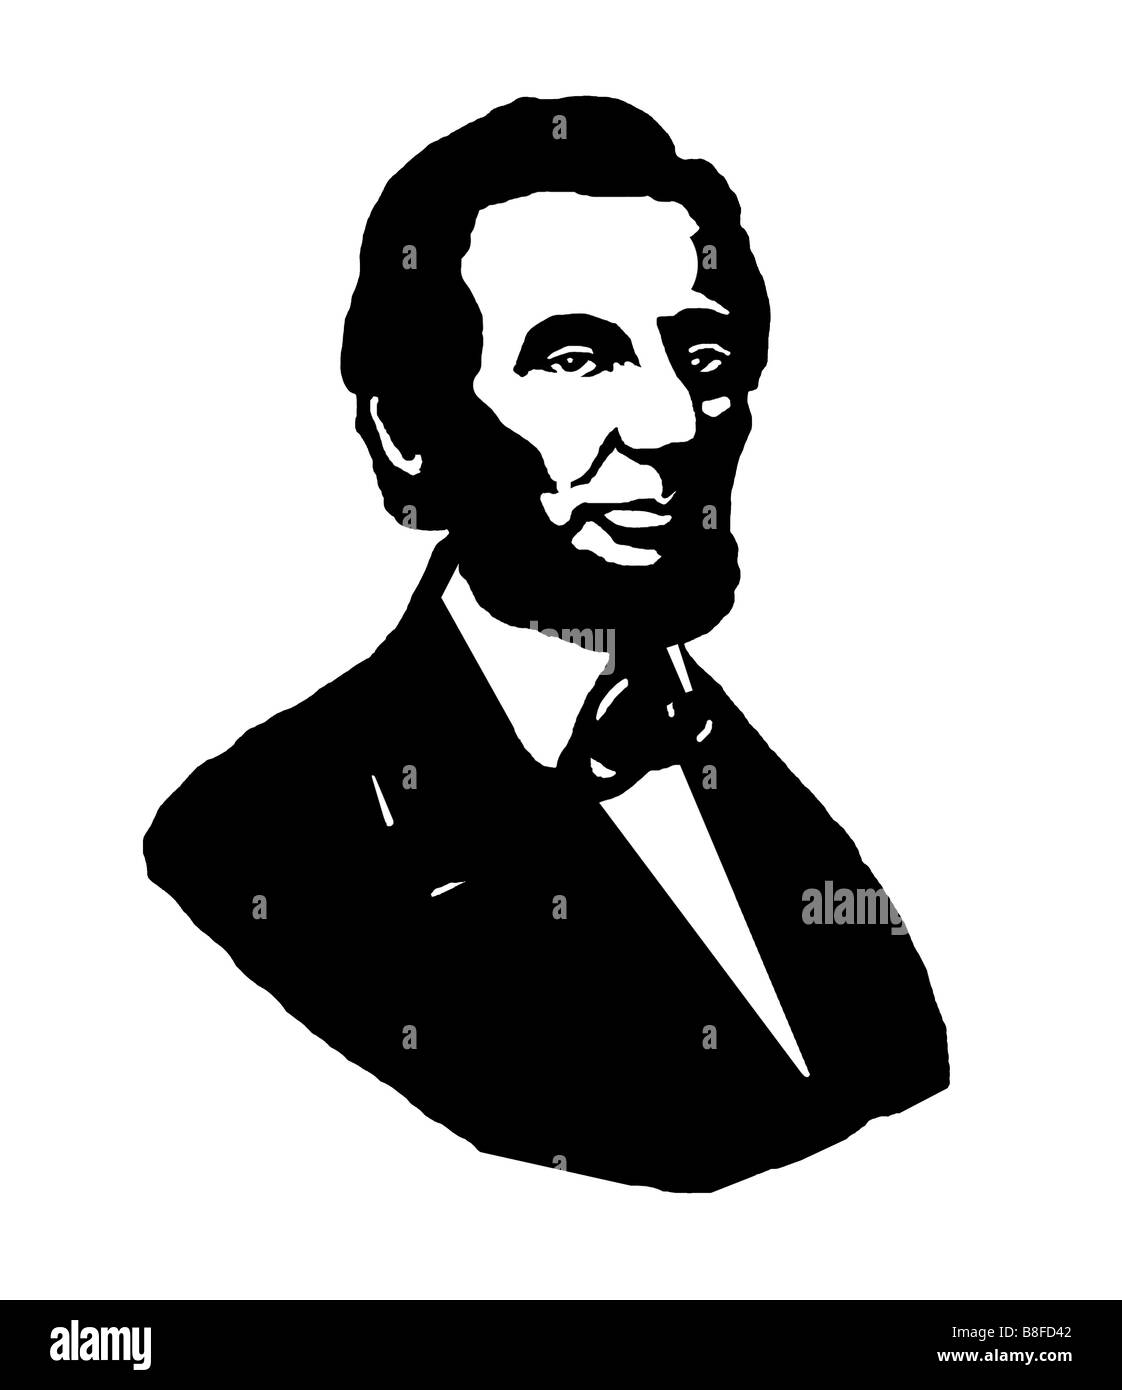 Abraham Lincoln 1809 1865 16th President of the USA Poster Style Modern Illustration Stock Photo